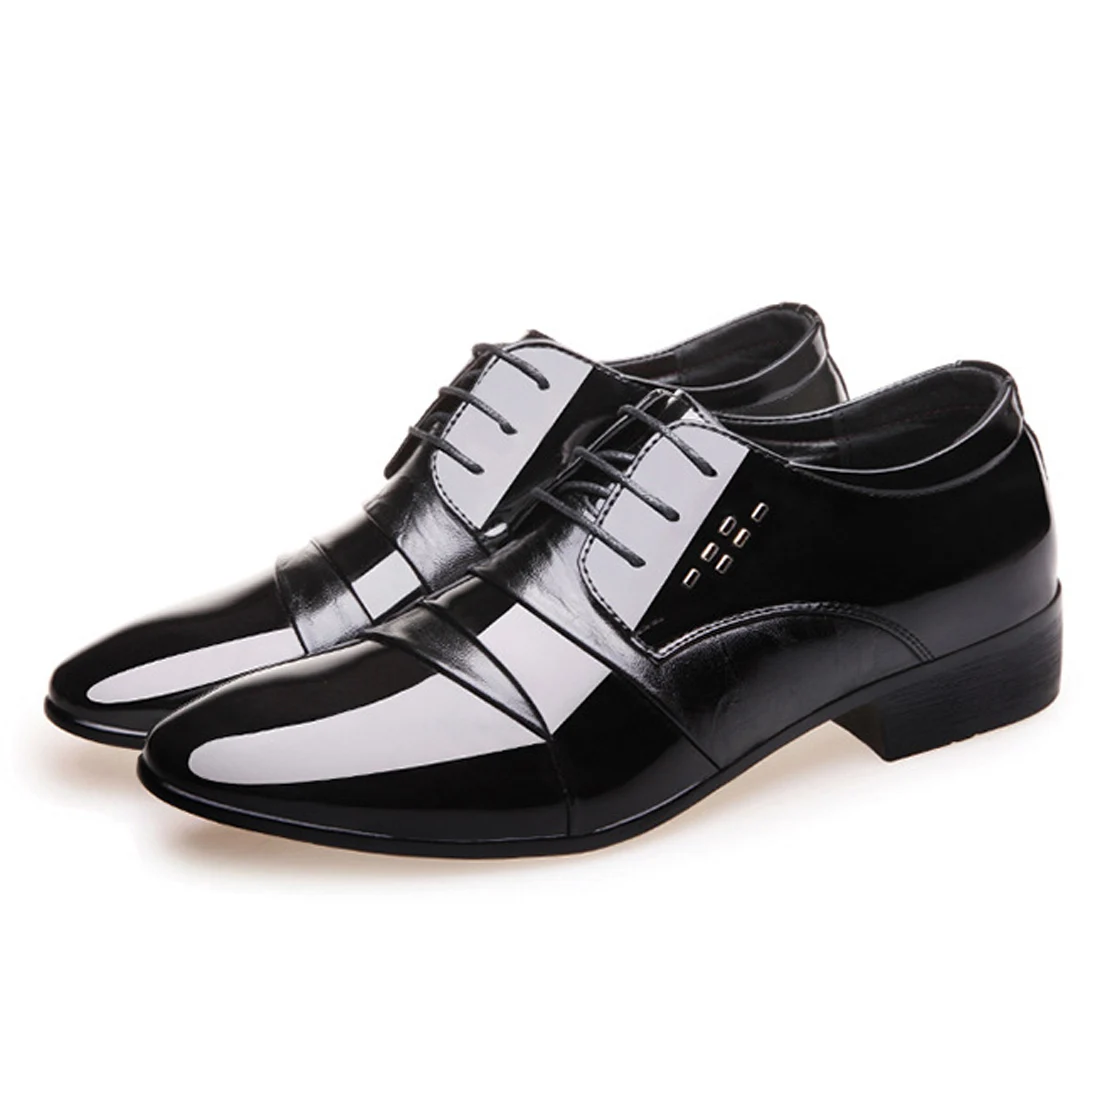 mens shoes casual luxury leather shoes black italian